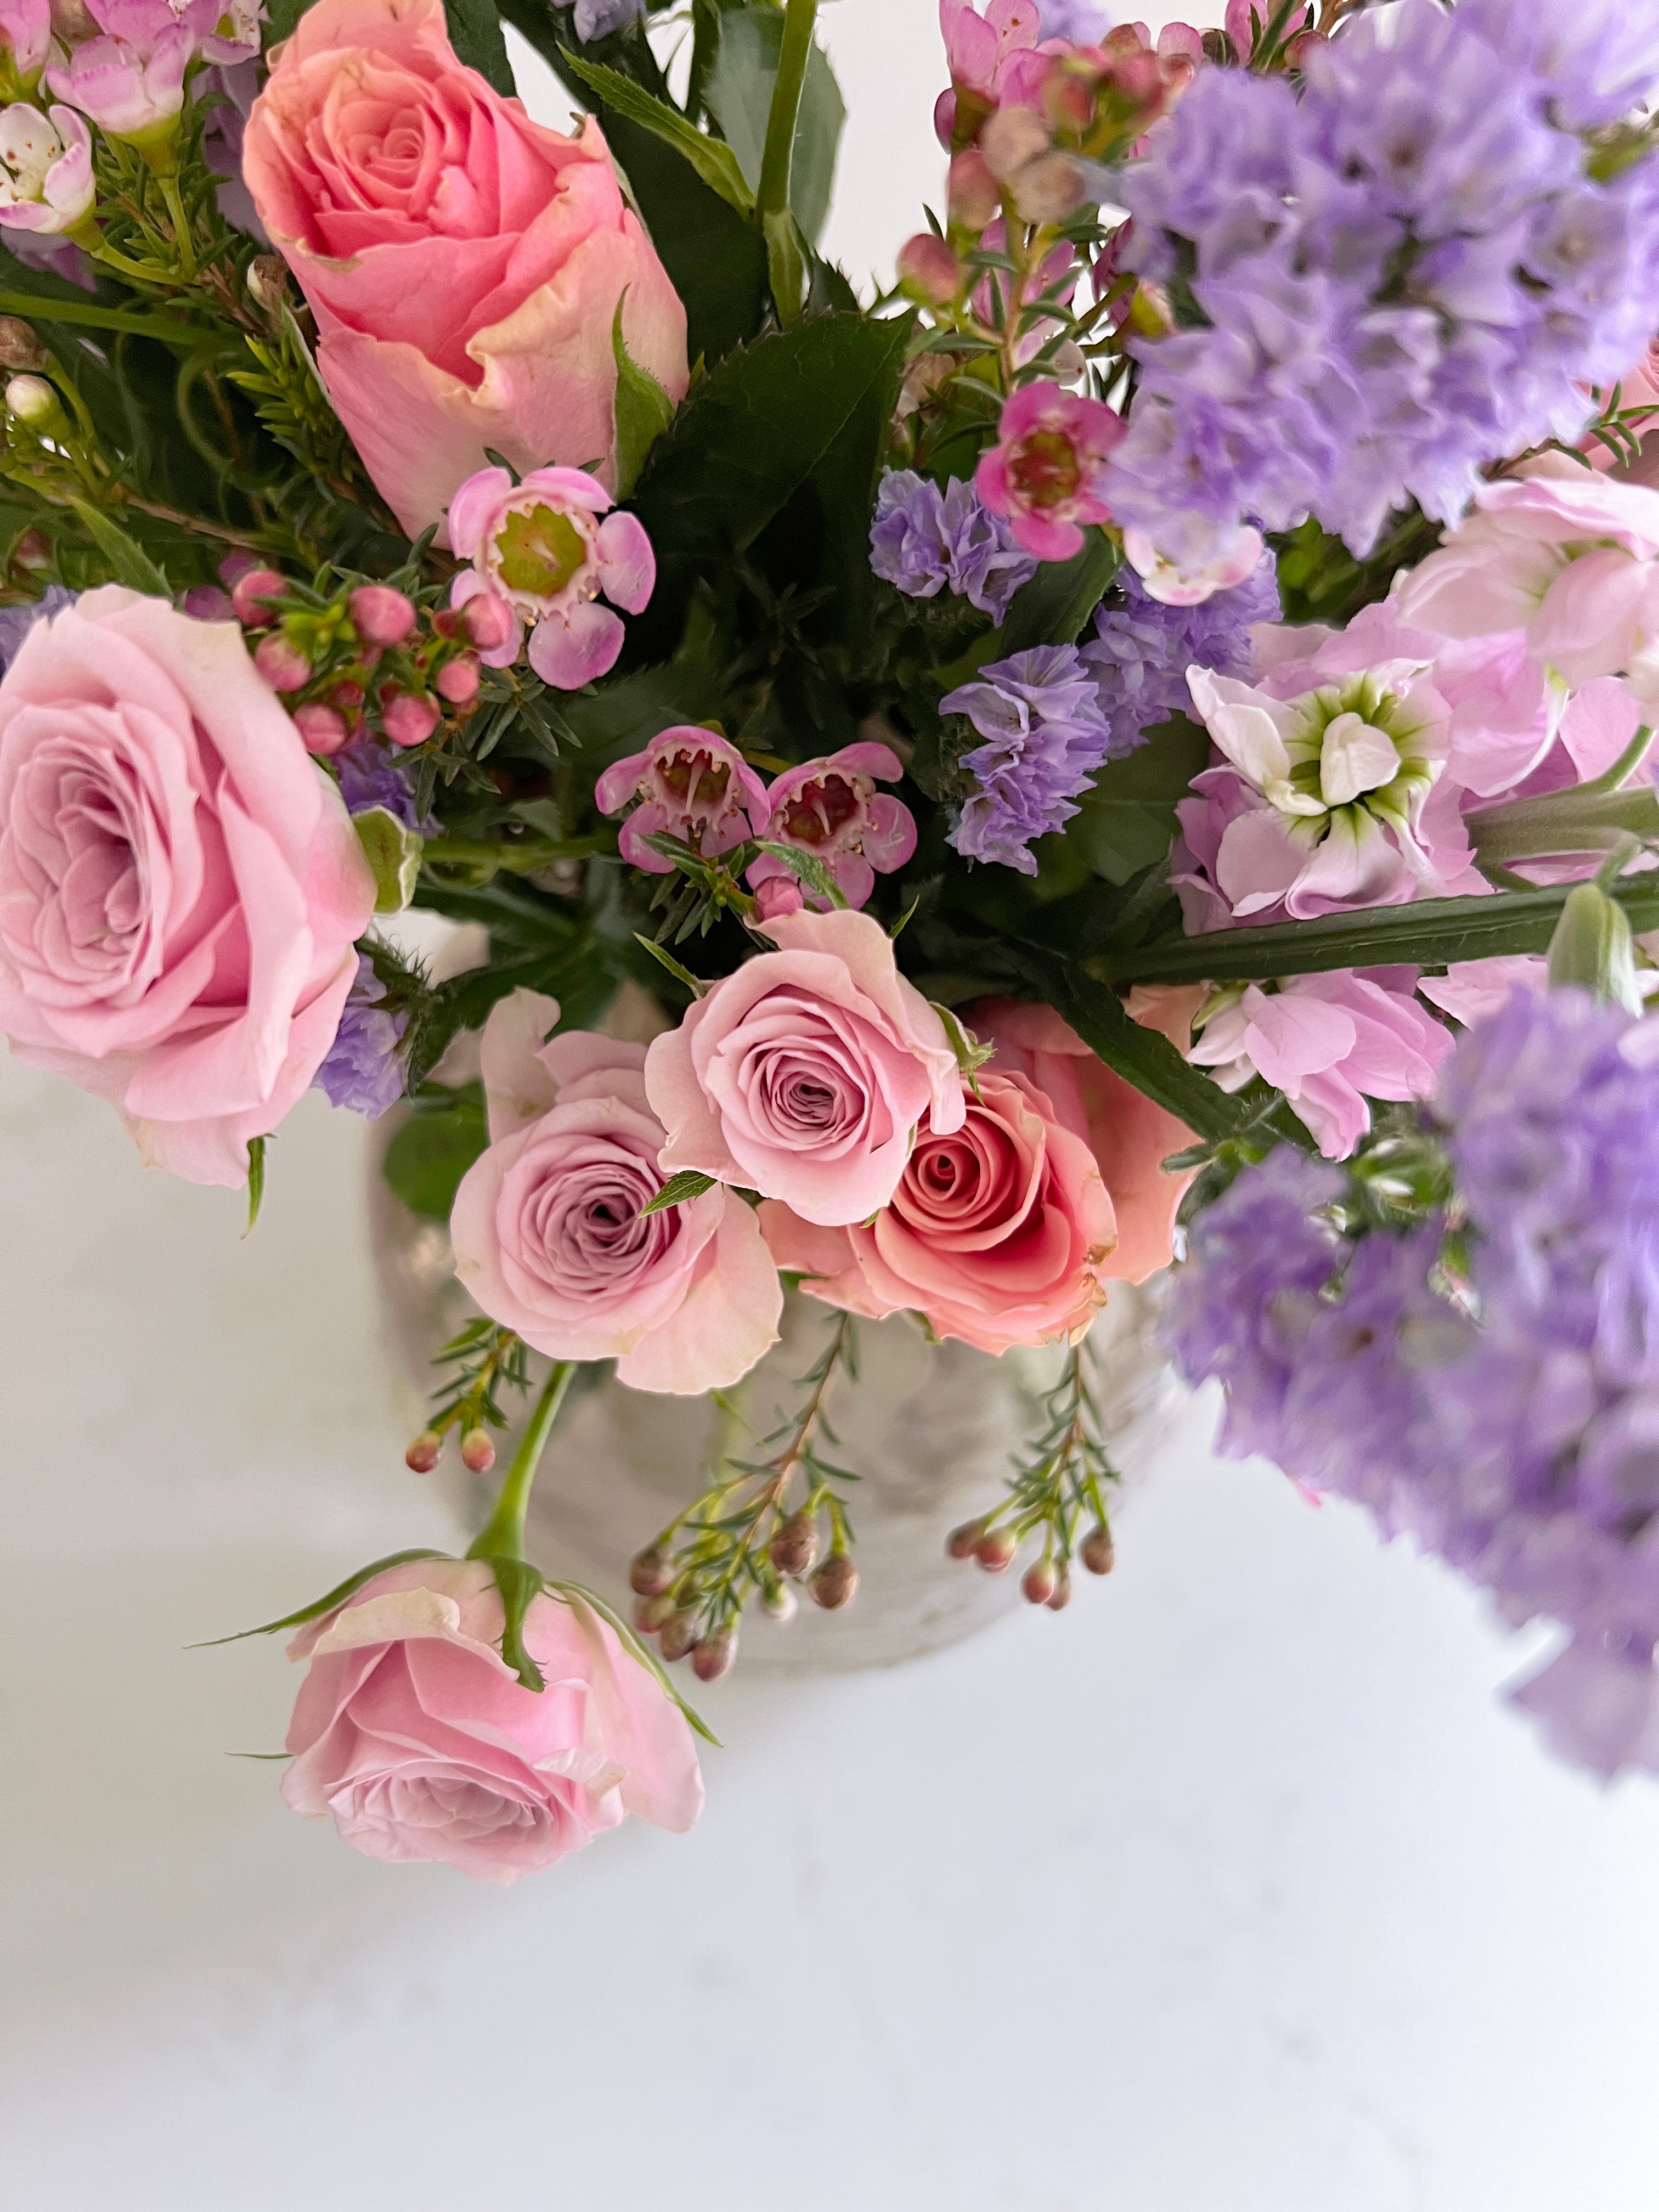 Flowers to Make Your Day - FLOWERFIX